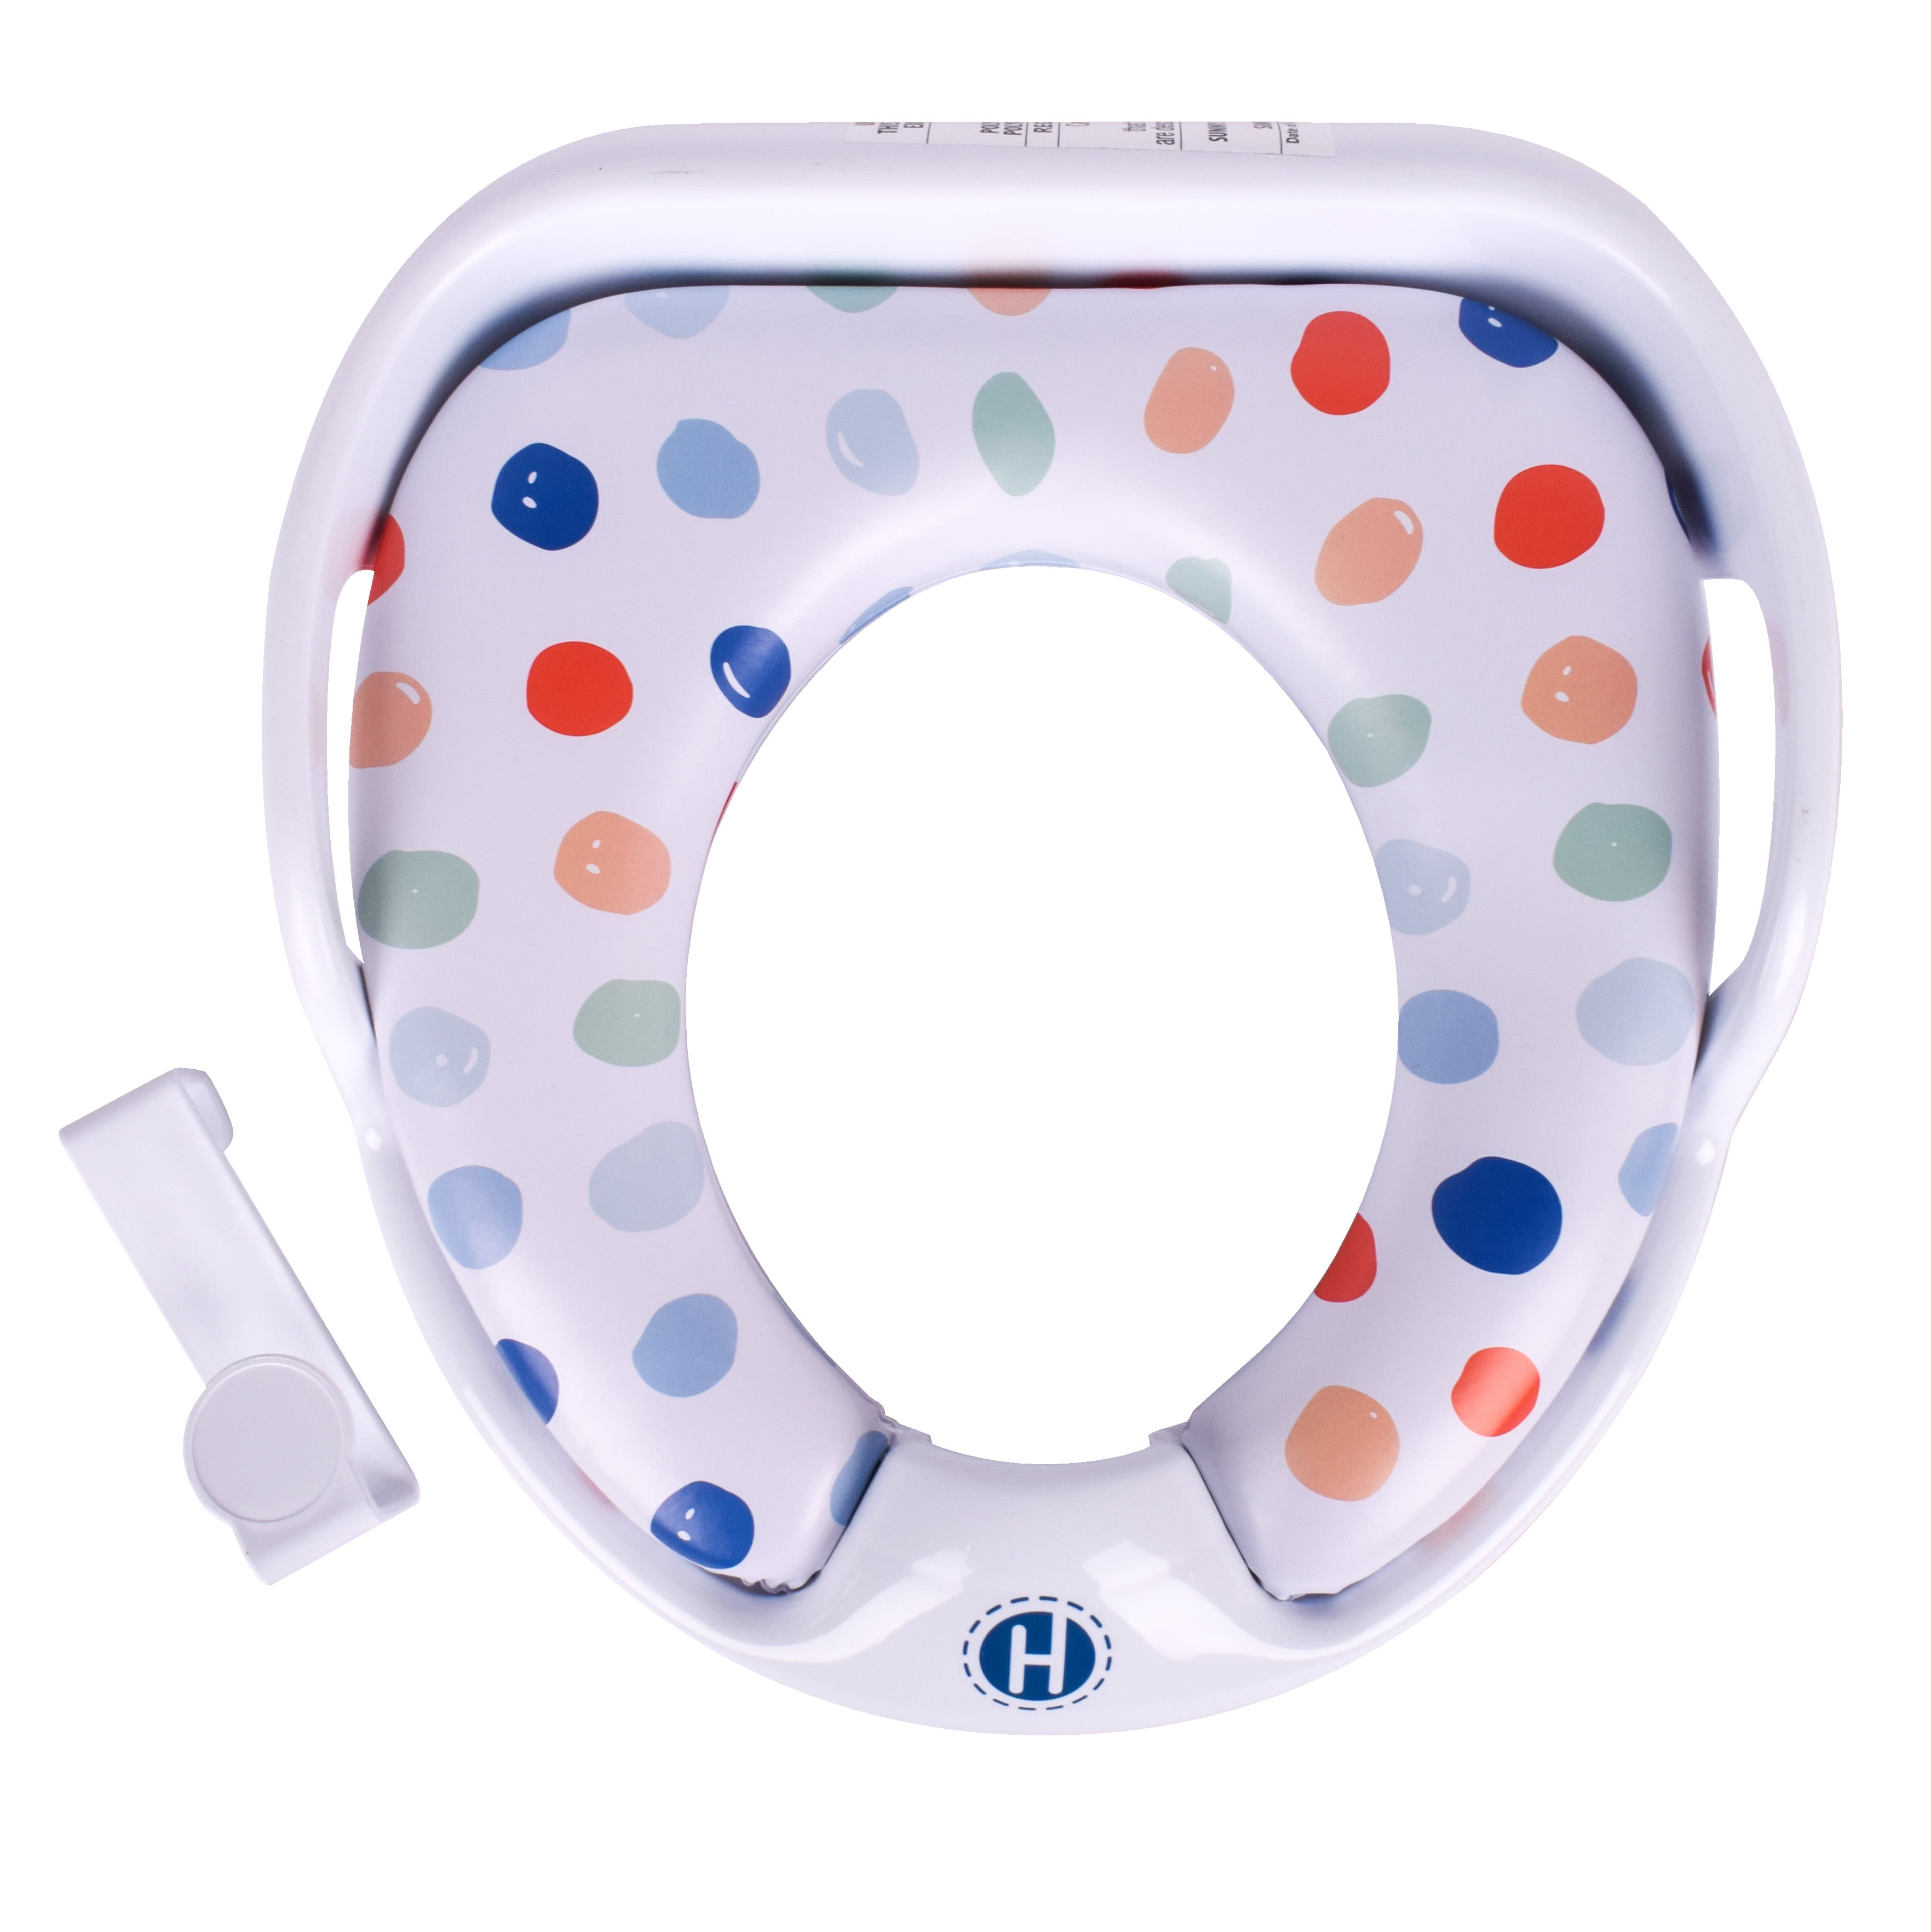 Potty Training Items for sale in Griffithville, Arkansas